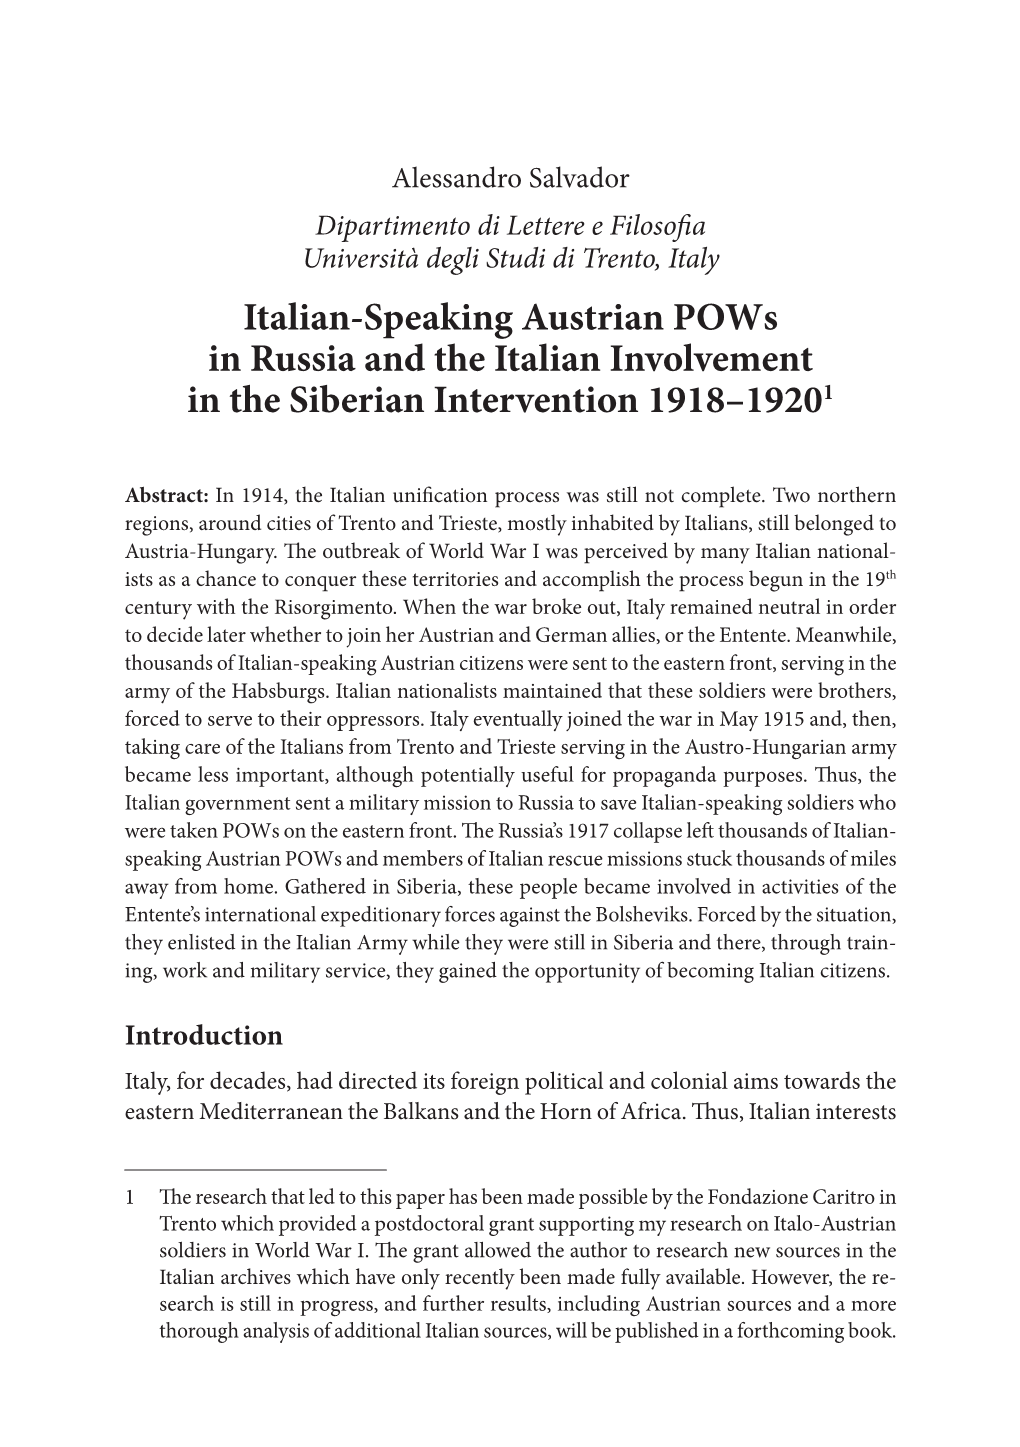 Italian-Speaking Austrian Pows in Russia and the Italian Involvement in the Siberian Intervention 1918–19201